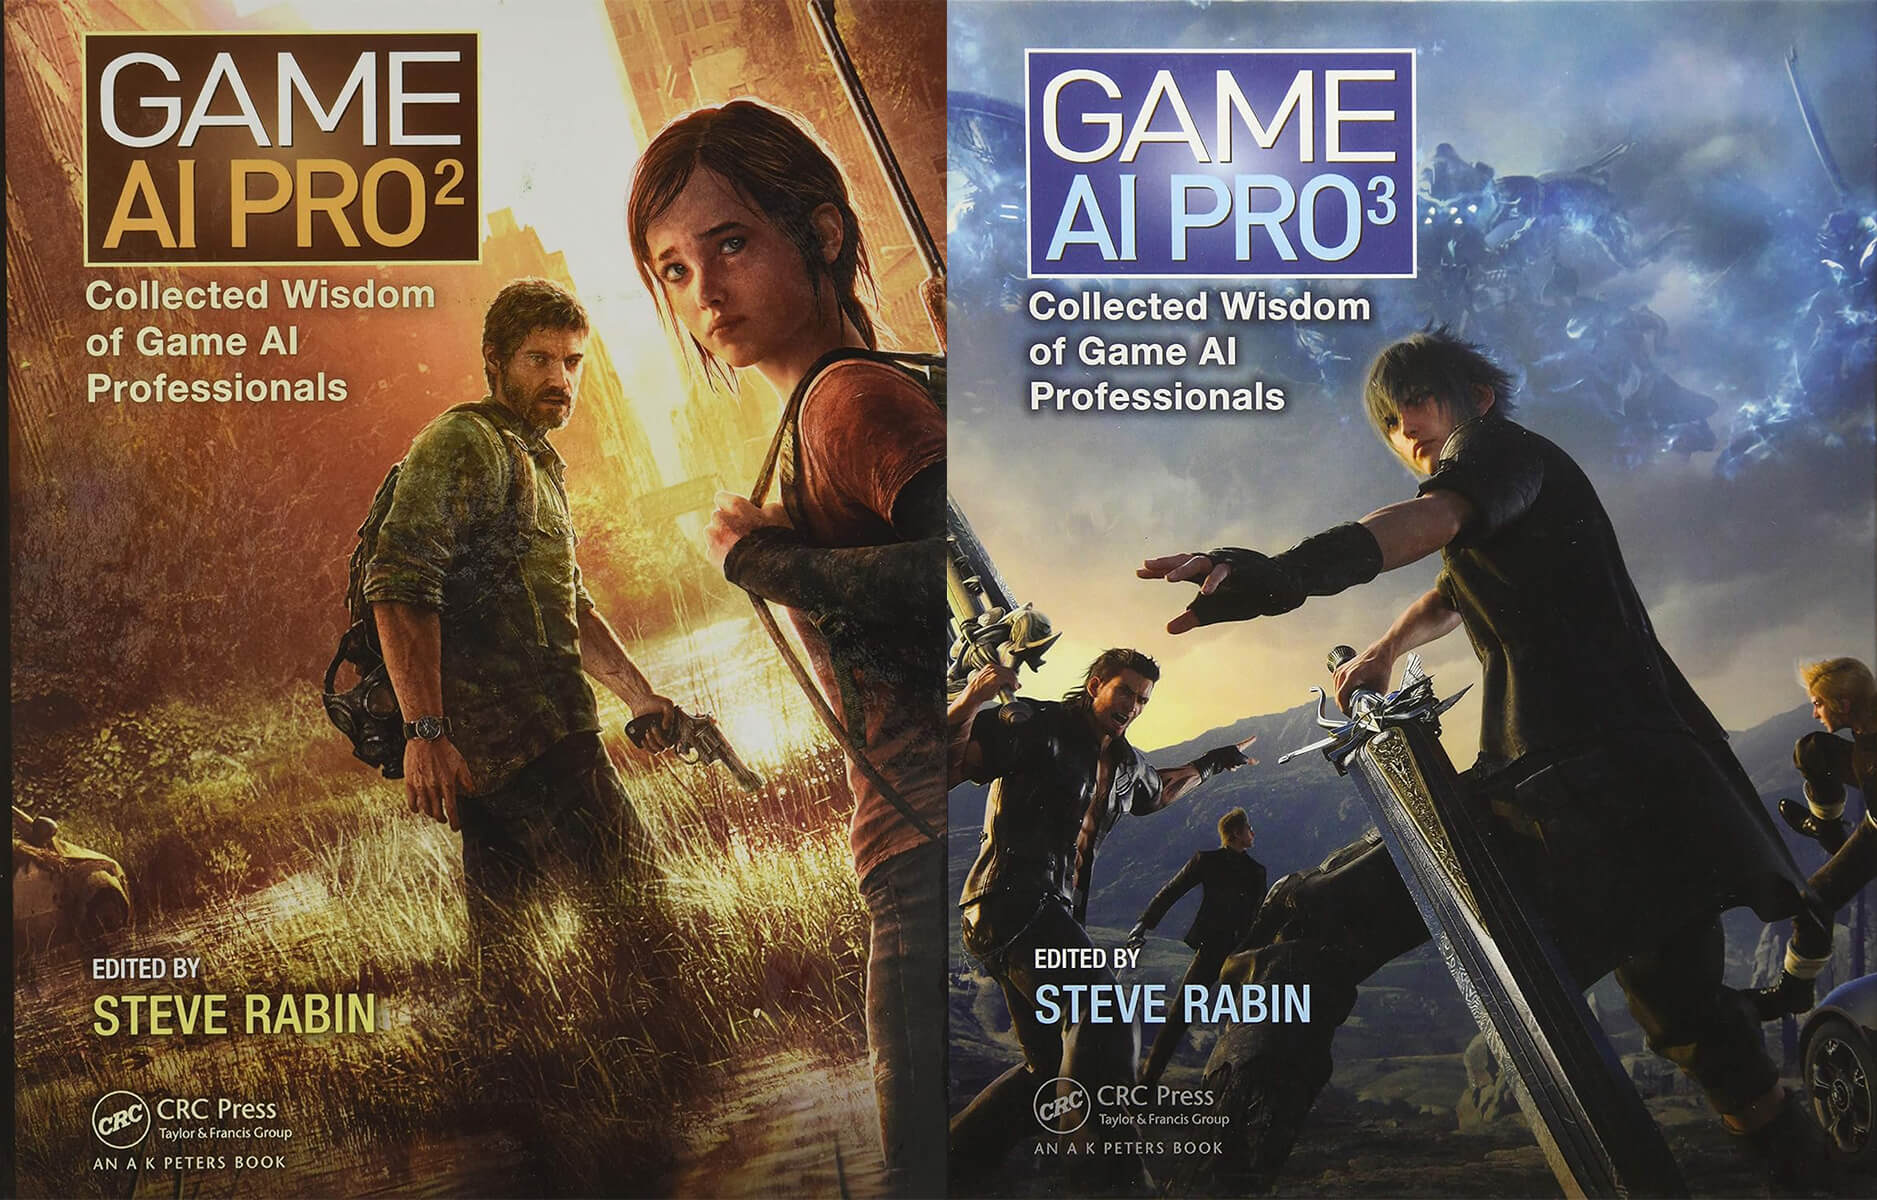 The covers of the second and third Game AI Pro books, with art from The Last of Us and Final Fantasy XV.